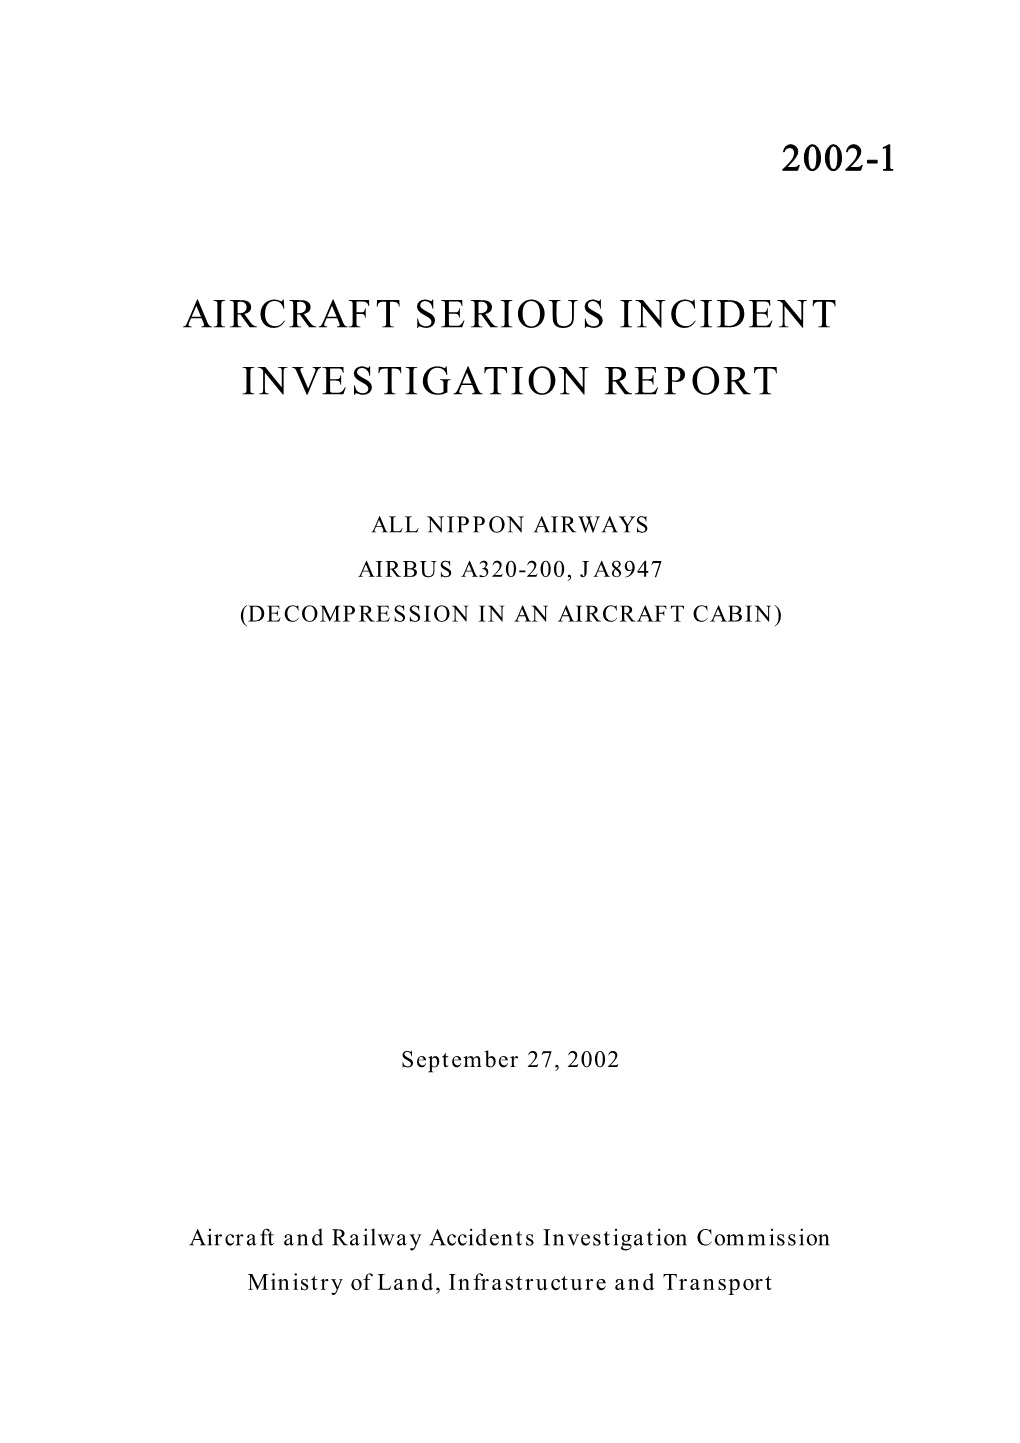 Aircraft Serious Incident Investigation Report